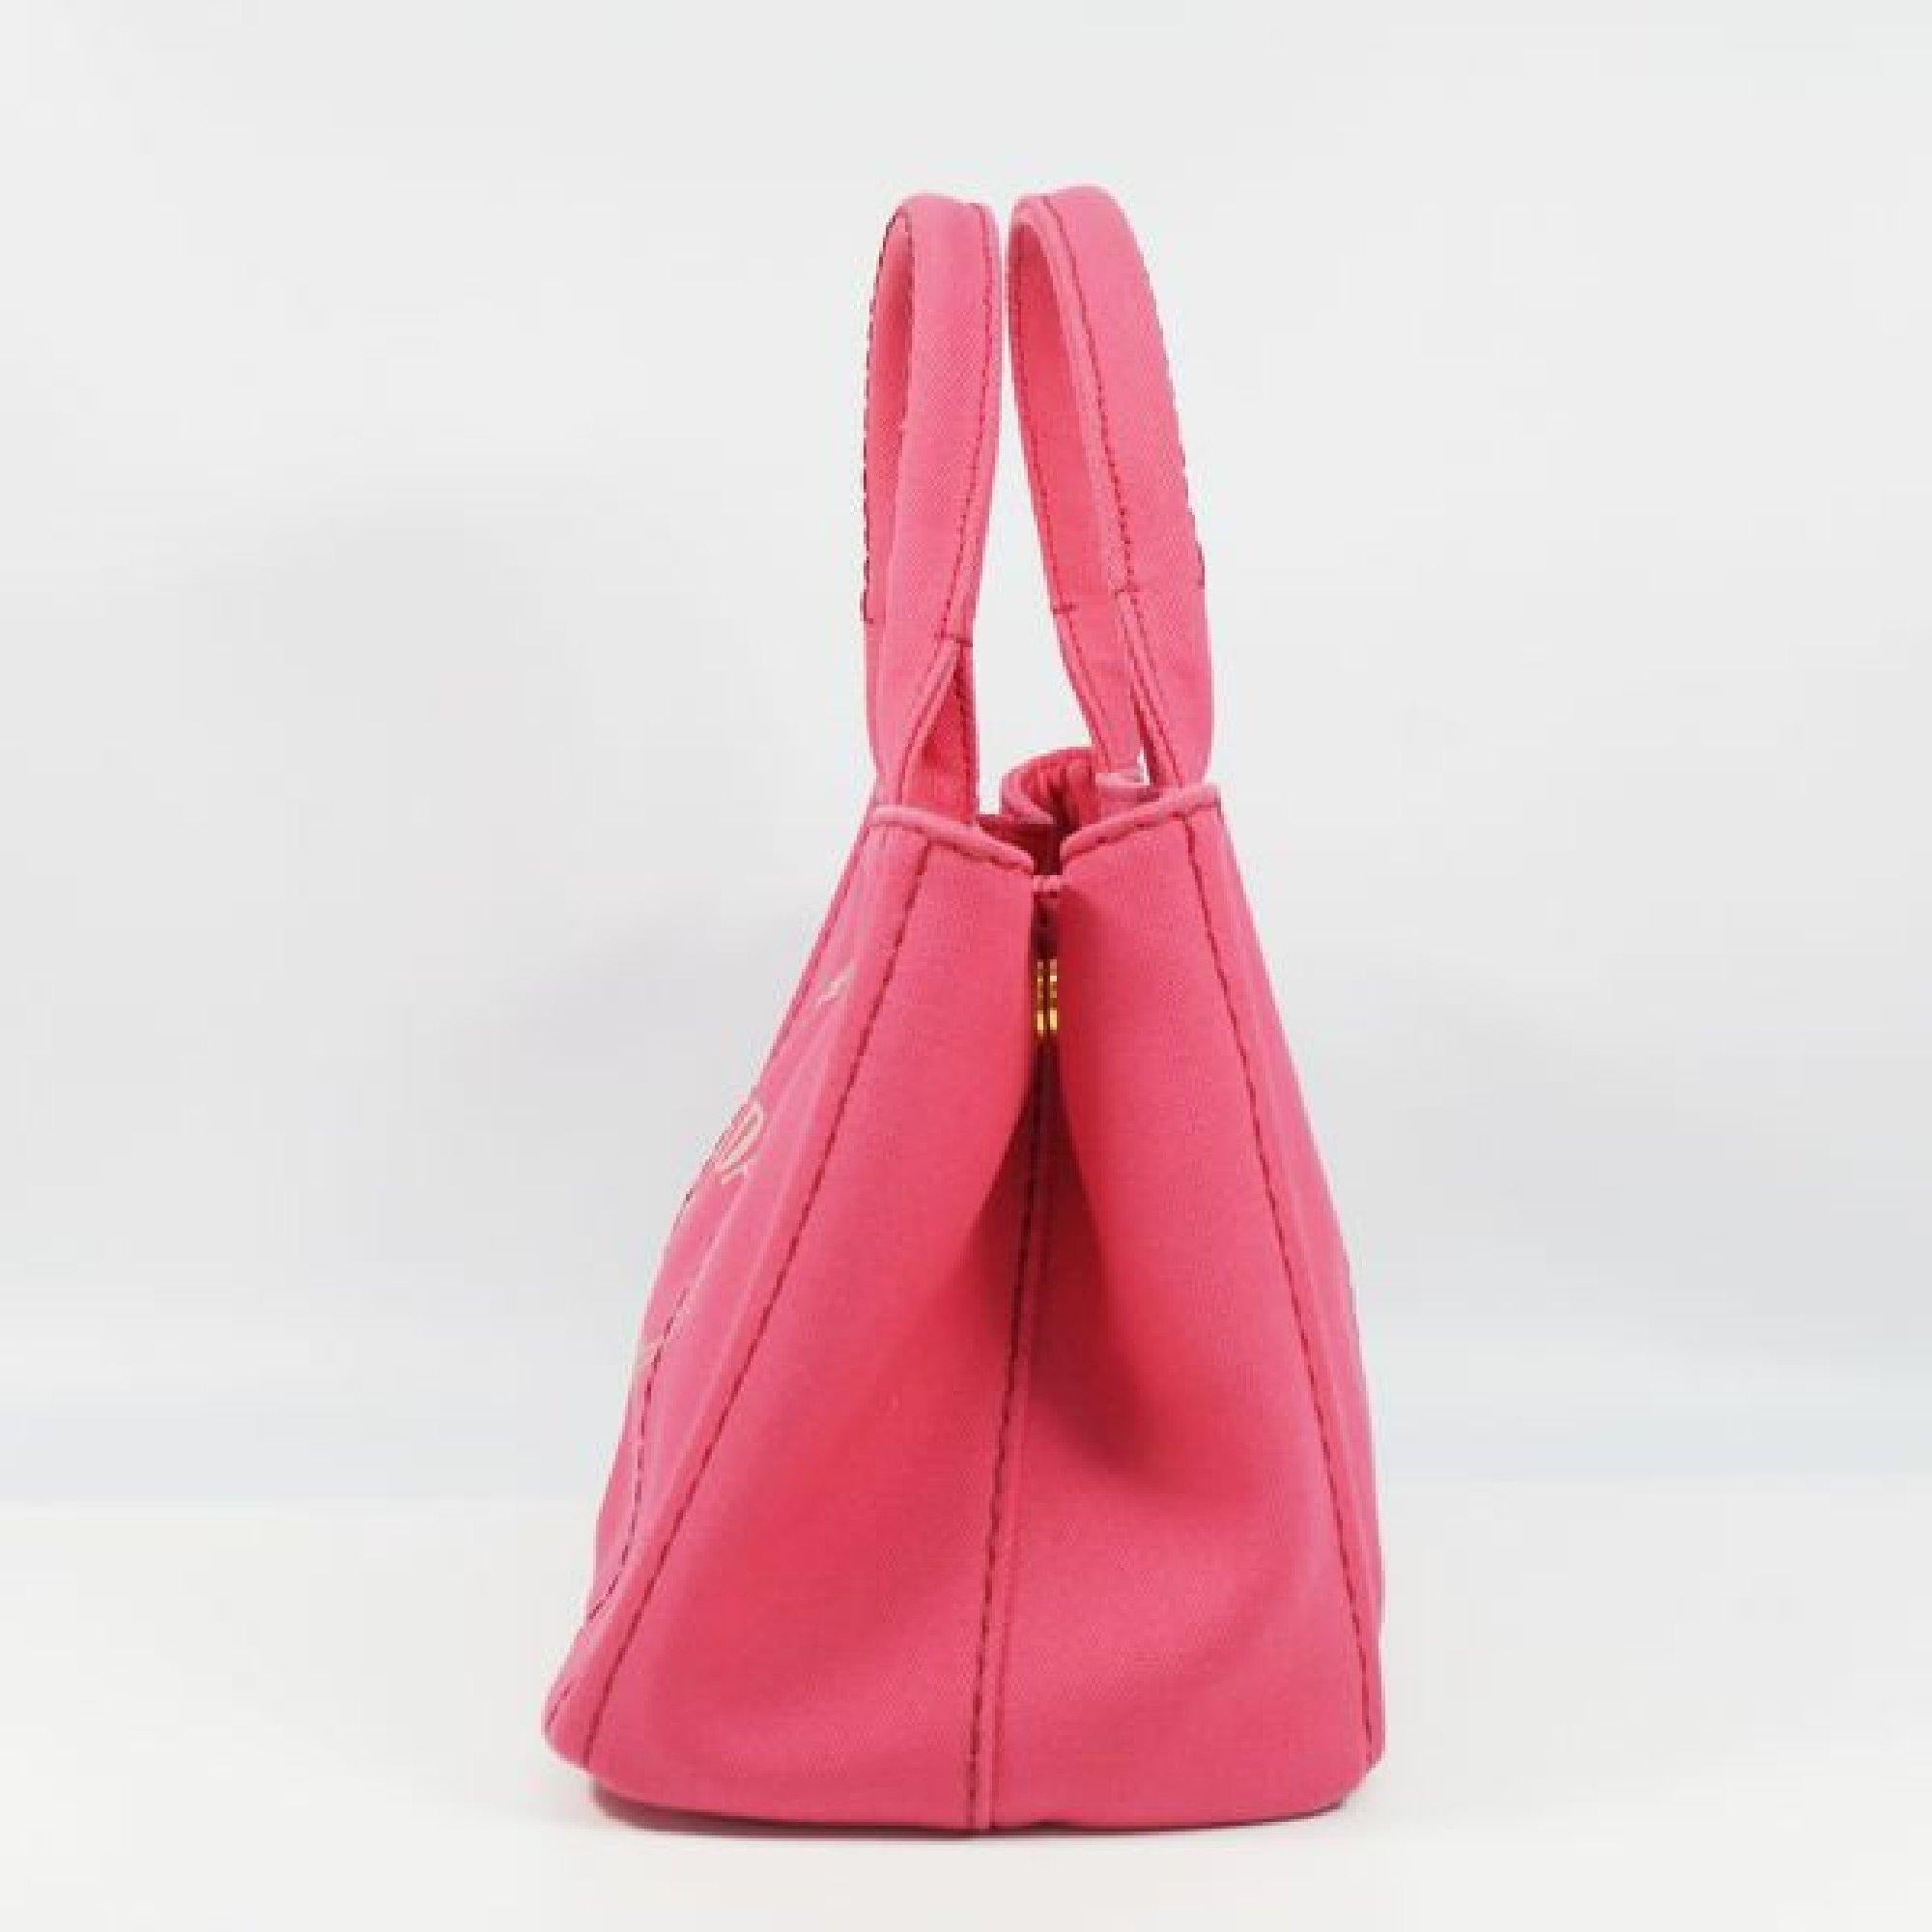 An authentic PRADA Canapa2WAY Womens tote bag B2439G Peonia( pink). The color is Peonia( pink). The outside material is Canvas. The pattern is Canapa2WAY. This item is Contemporary. The year of manufacture would be 1986.
Rank
AB signs of wear